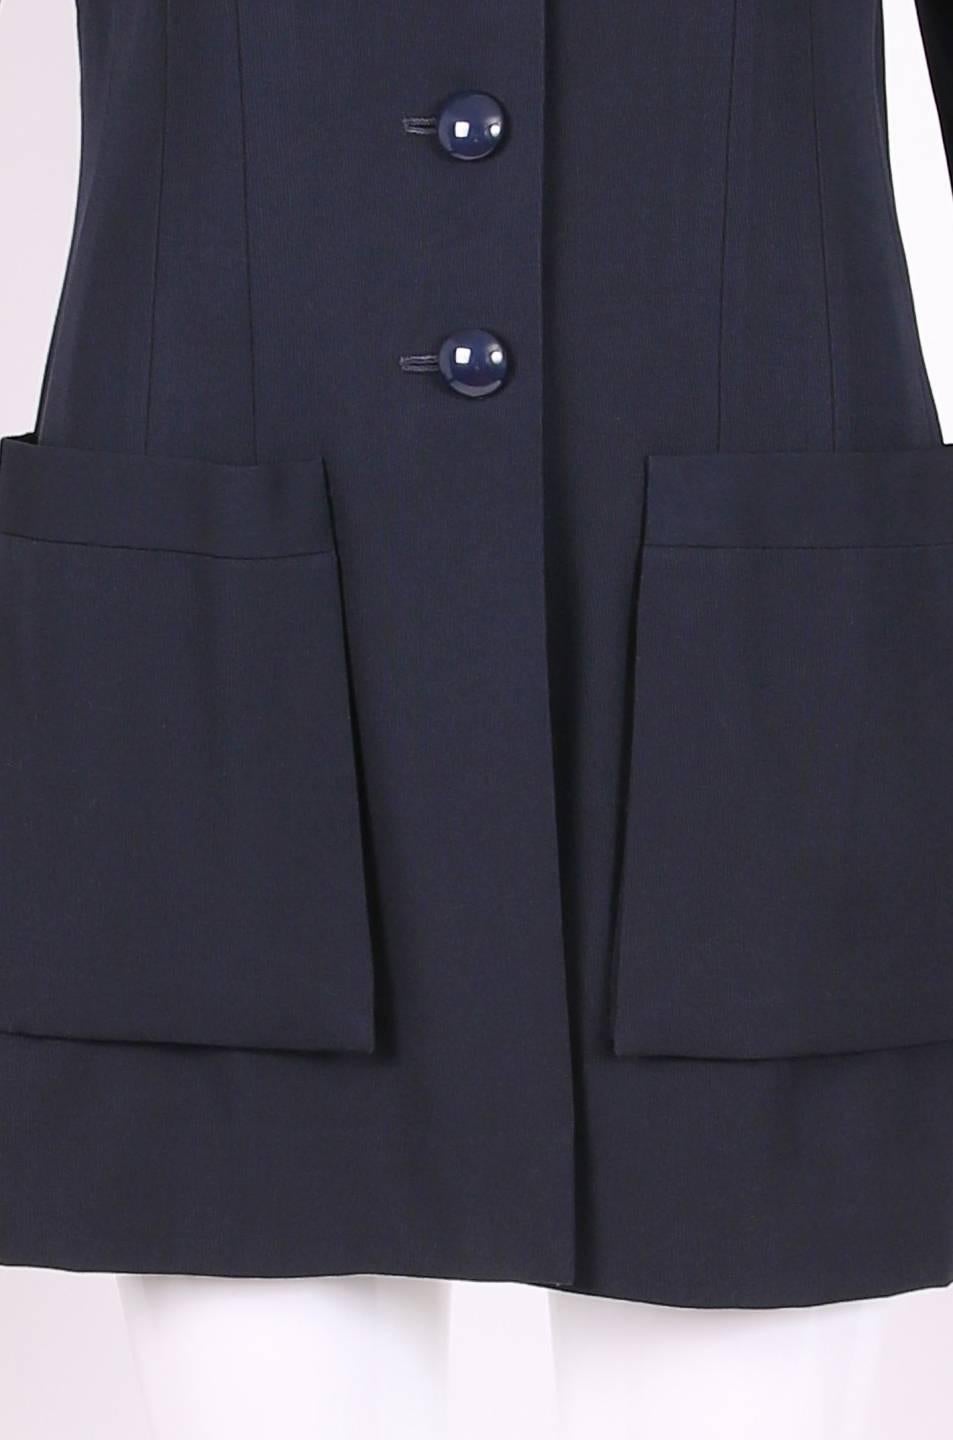 Chanel Haute Couture Navy Blue Wool Jacket and Skirt Ensemble No. 68181 1